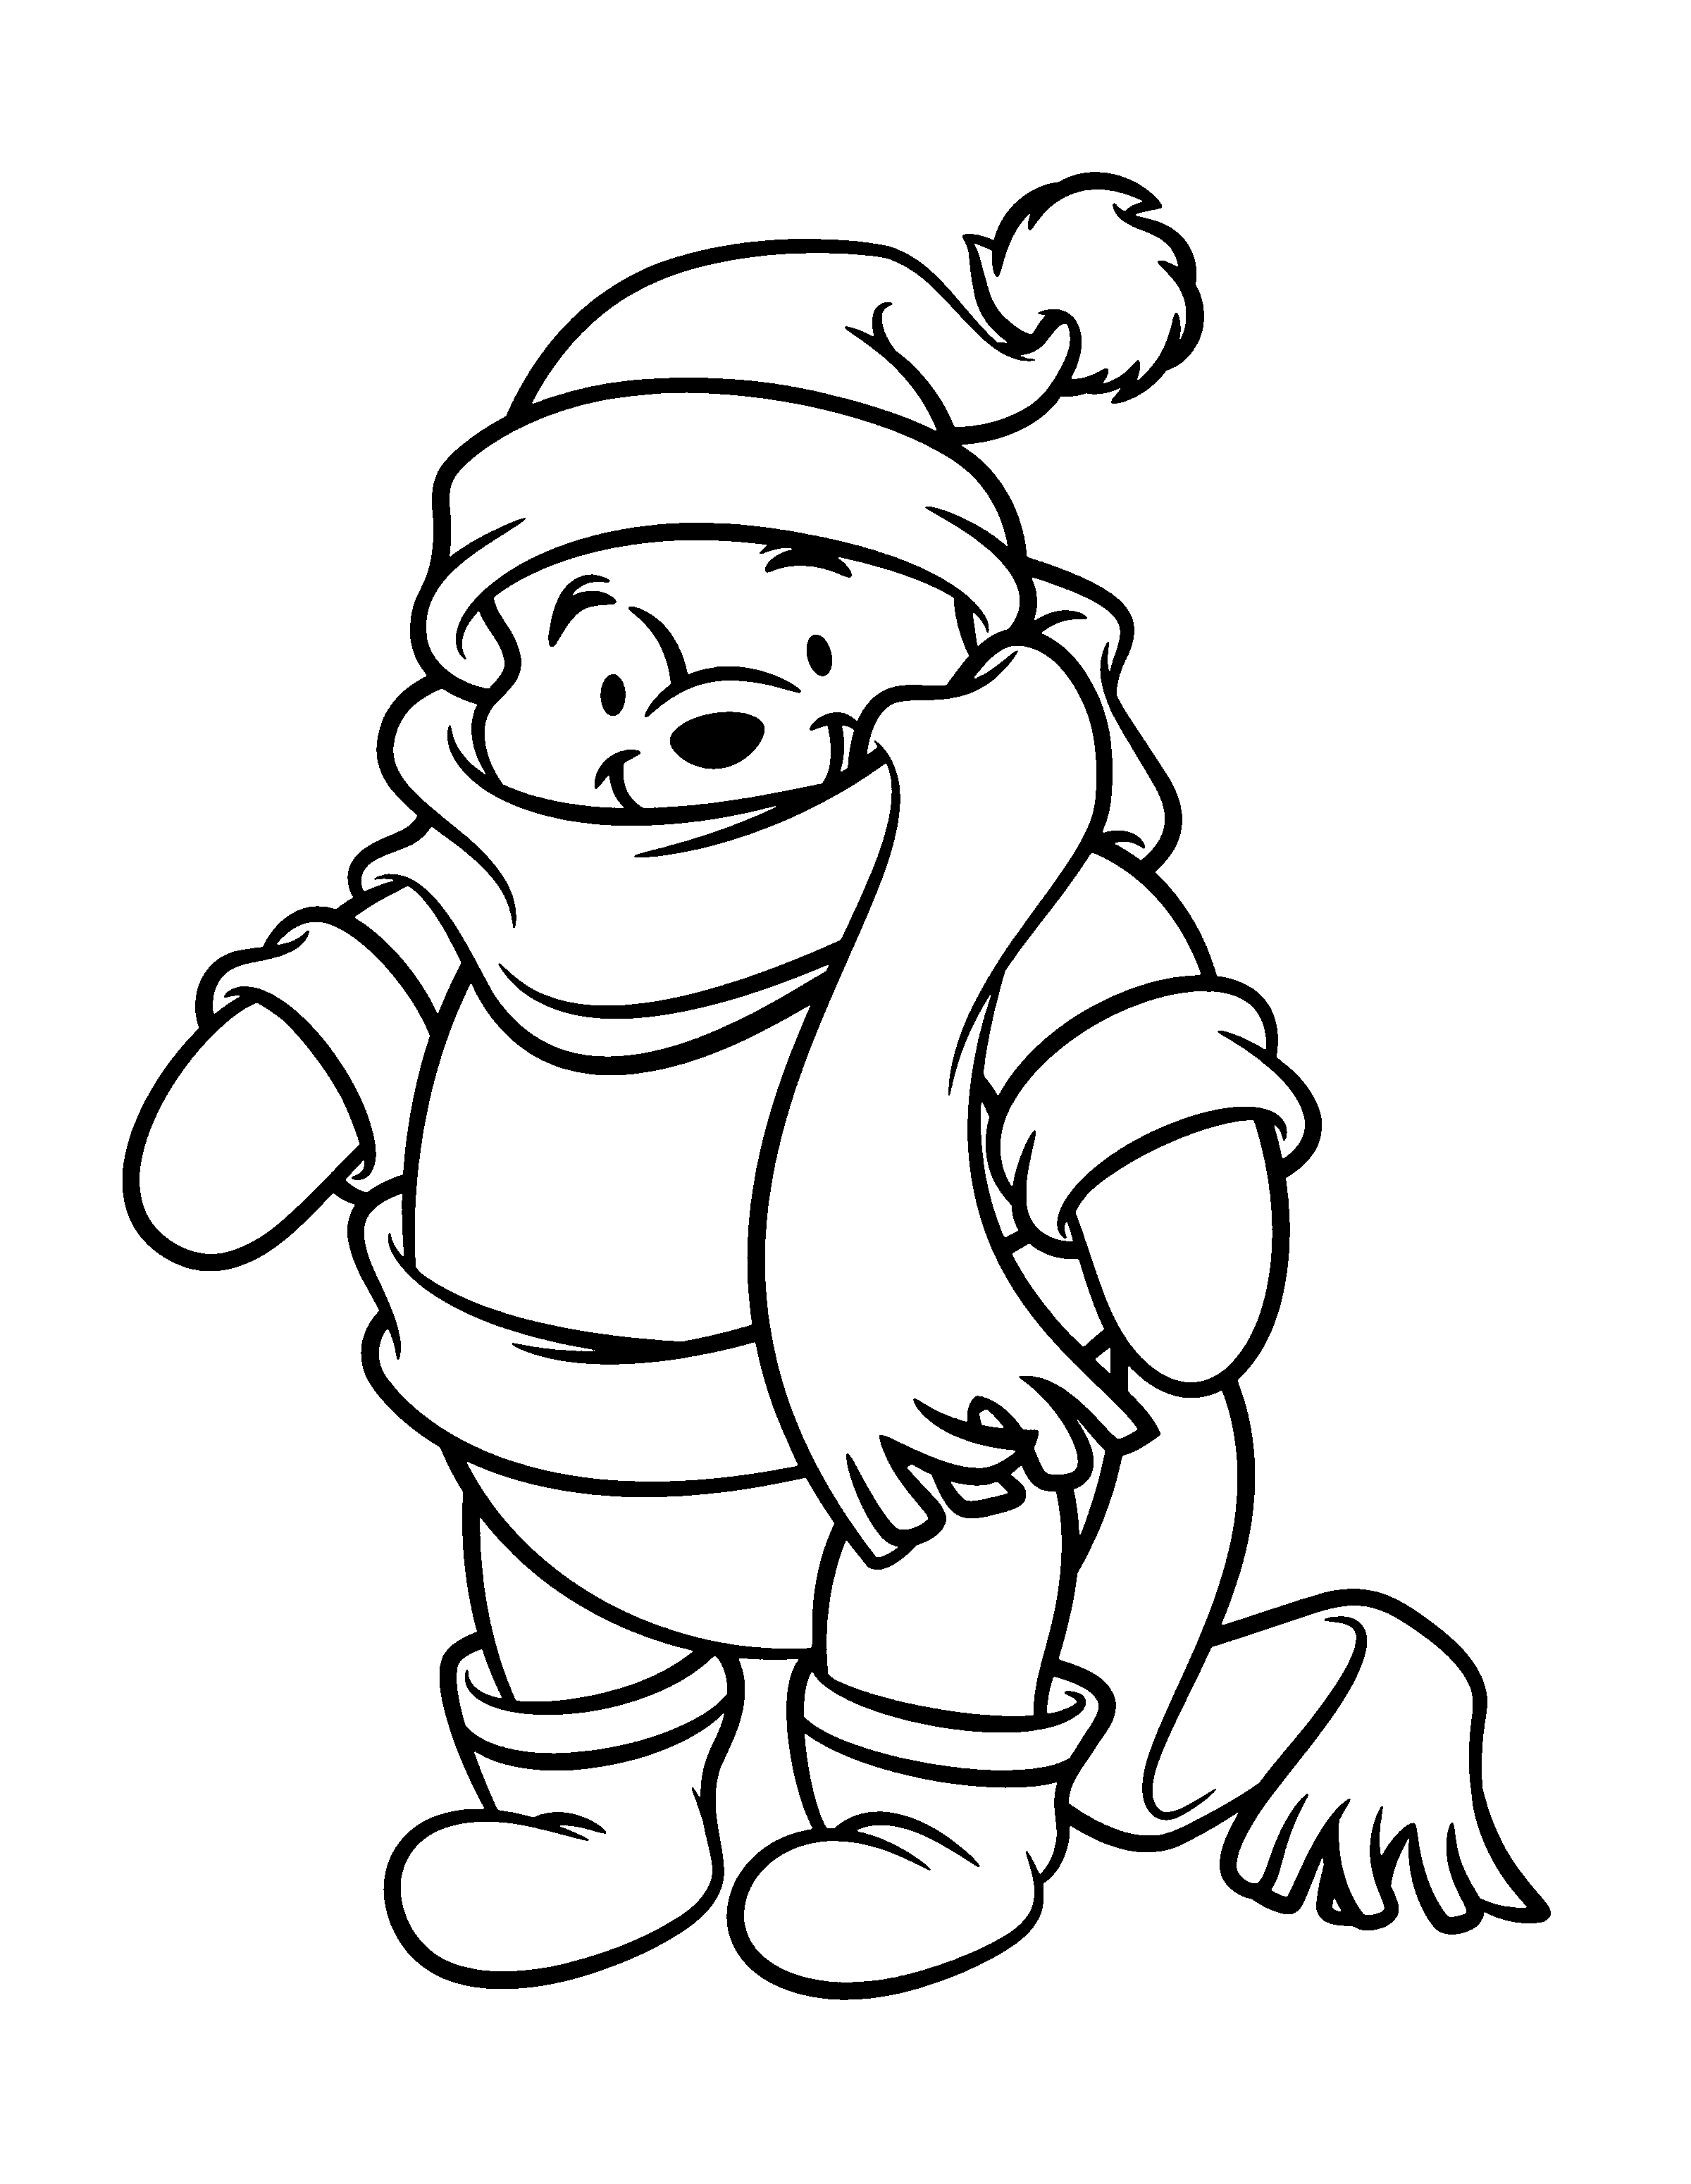 pooh in winter clothes coloring page kids | thingkid.